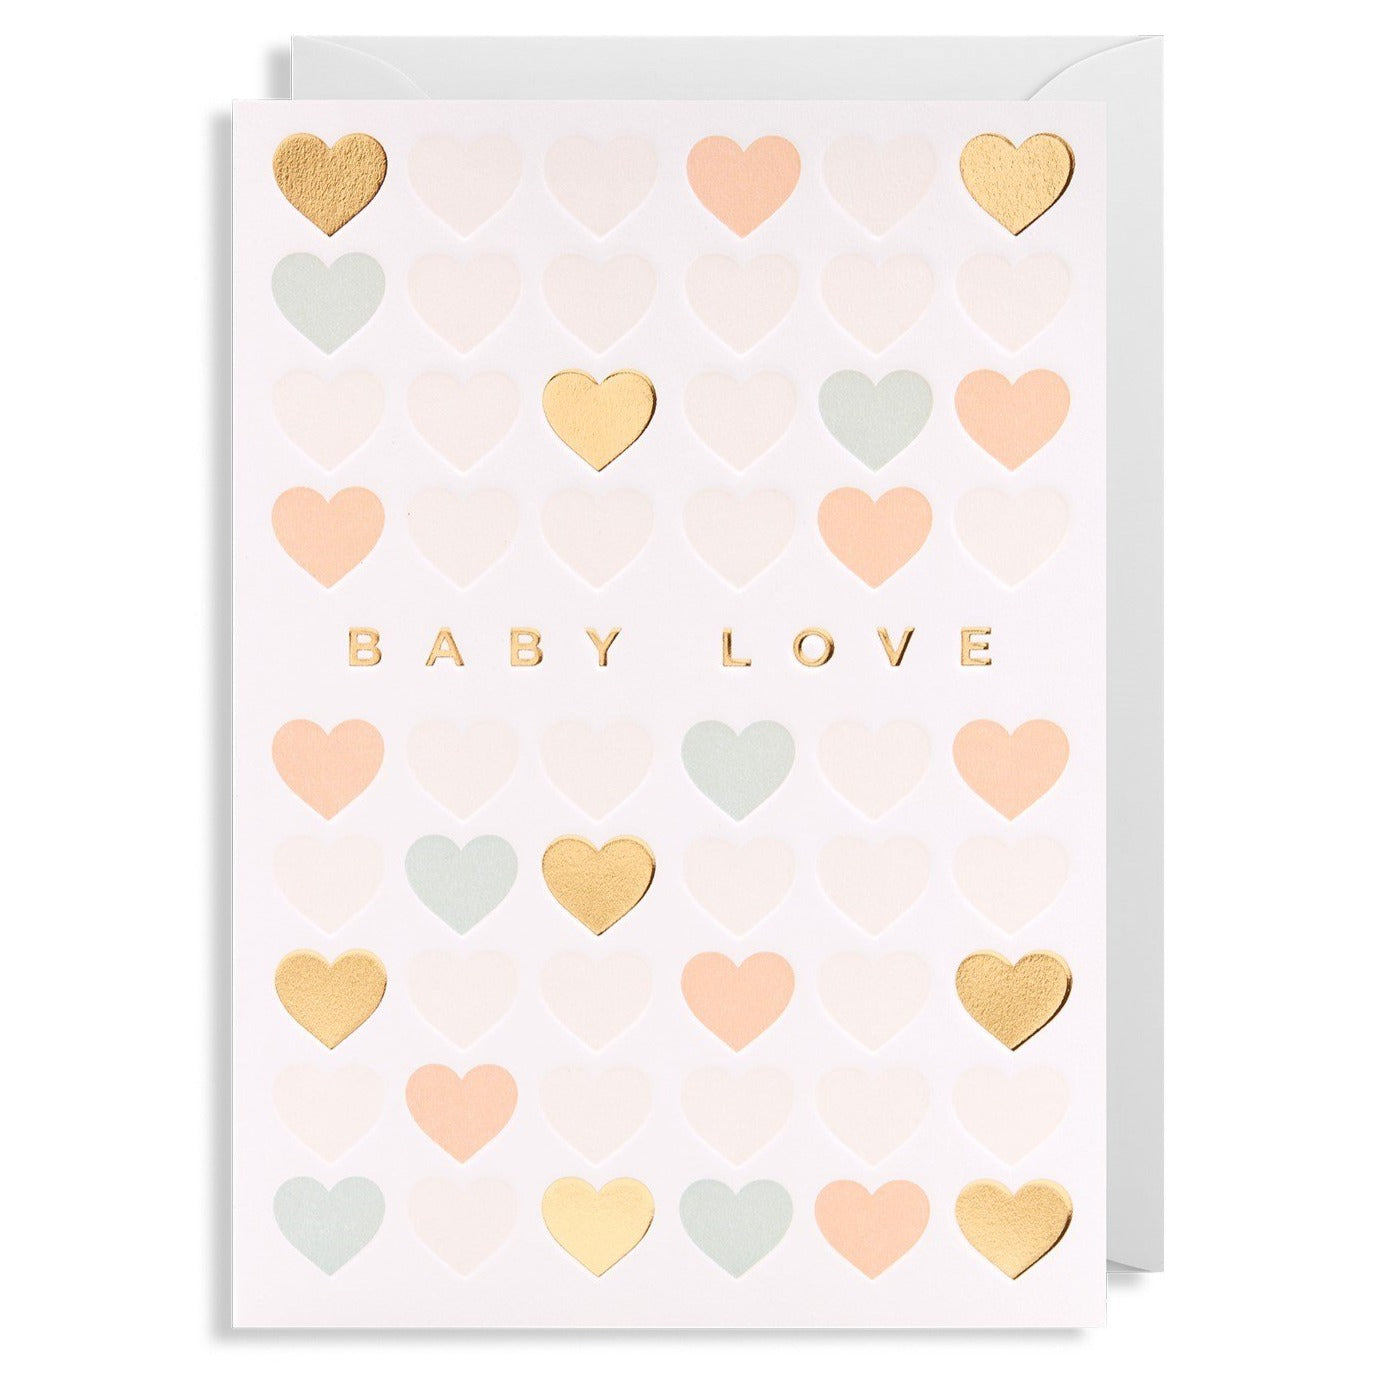 Baby Love Greeting Card at Bonjour Baby Baskets